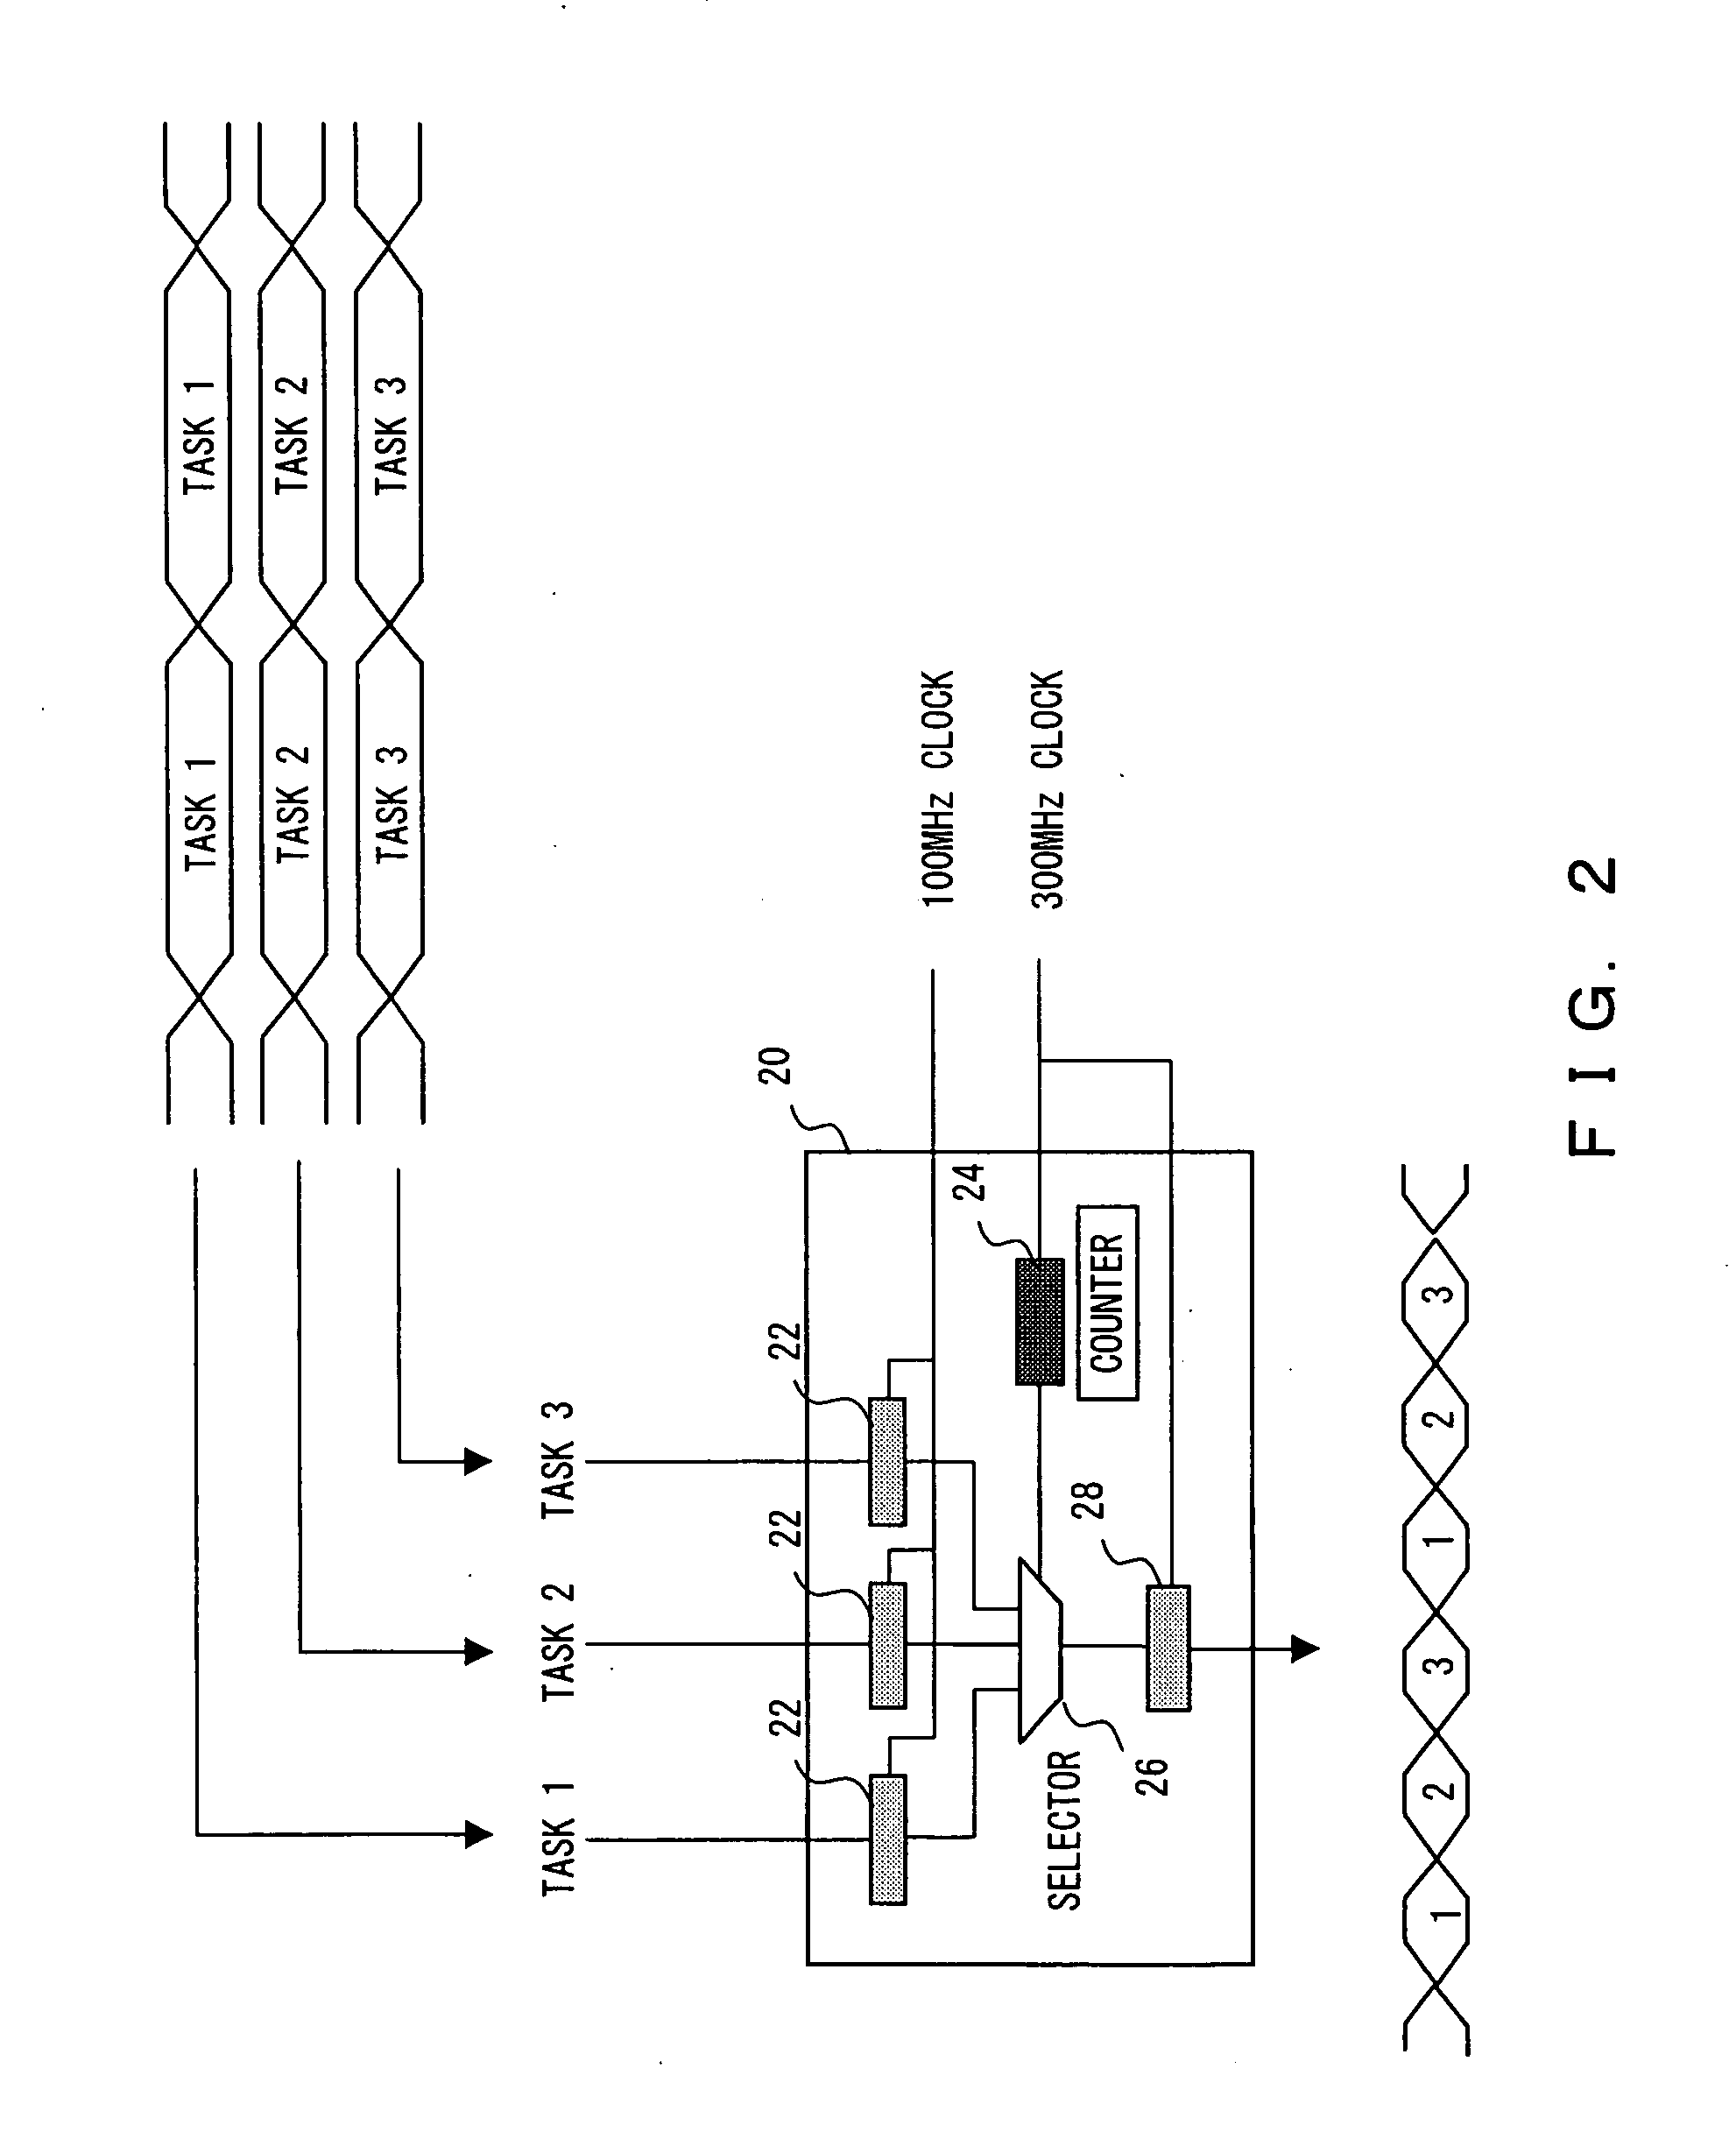 Reconfigurable circuit in which time division multiple processing is possible